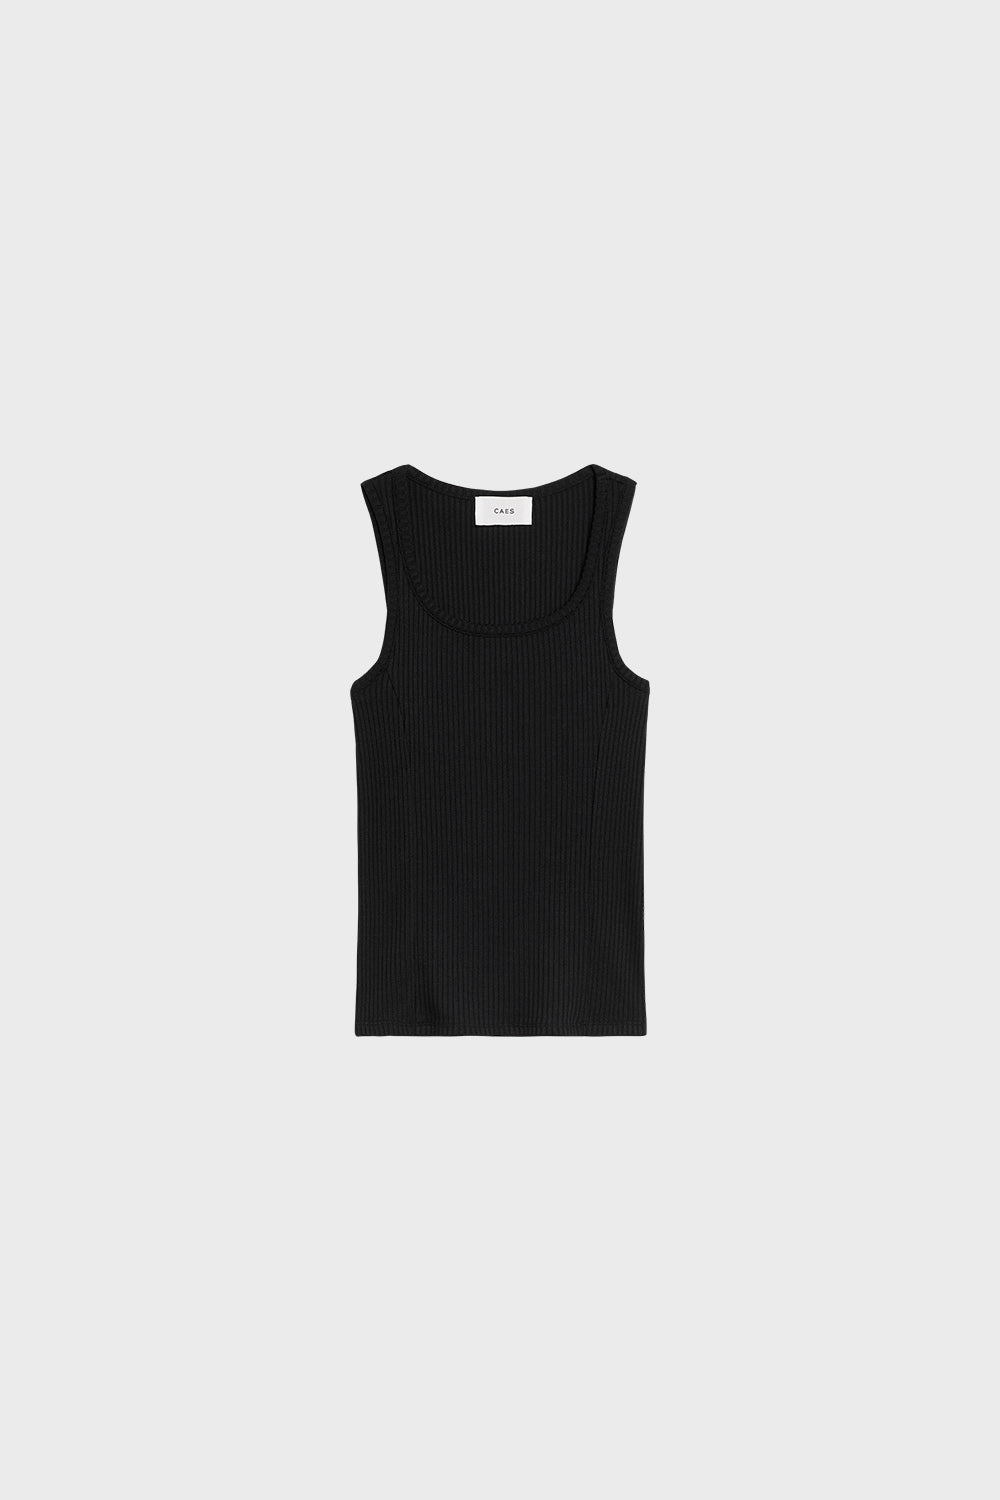 CAES - 0007 jersey singlet with side panels | caes-store.com